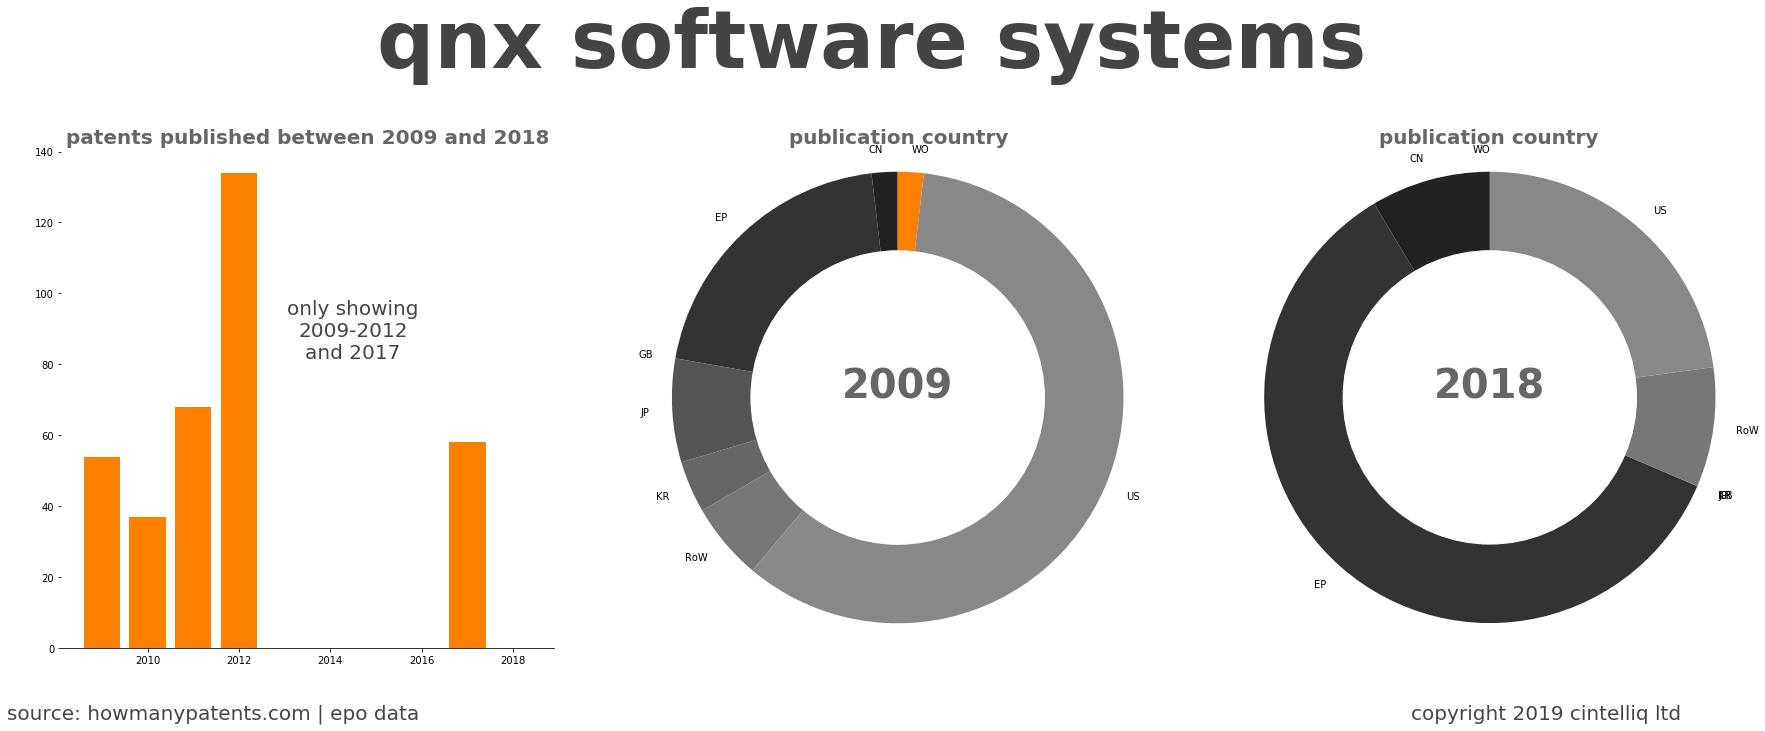 summary of patents for Qnx Software Systems